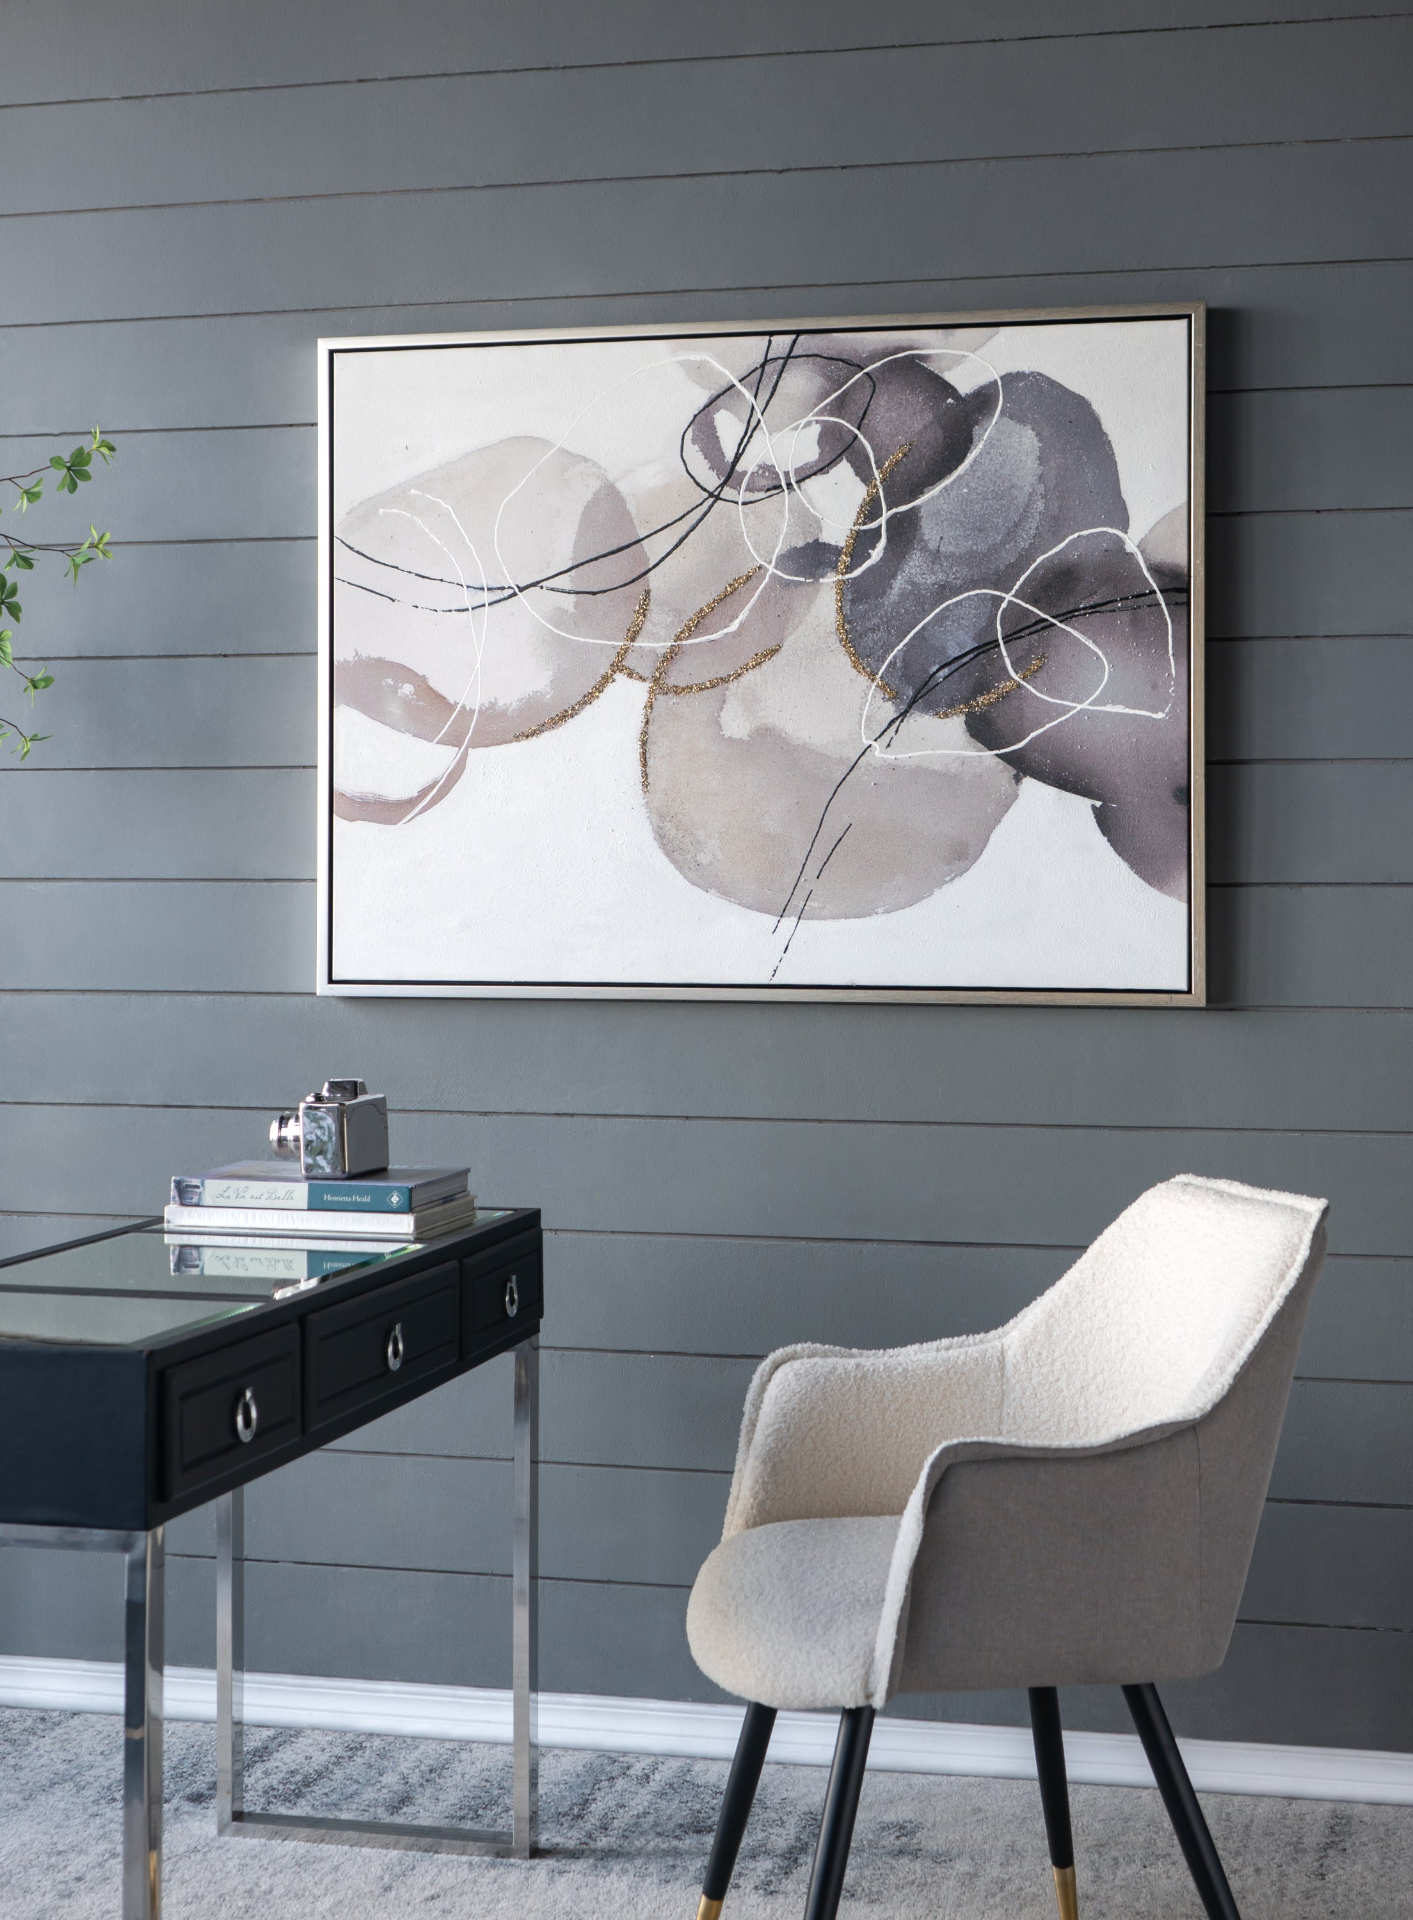 47" x 35.5" Large Modern Oil Painting, Hand Painted Abstract Gray Brown Watercolor Texture